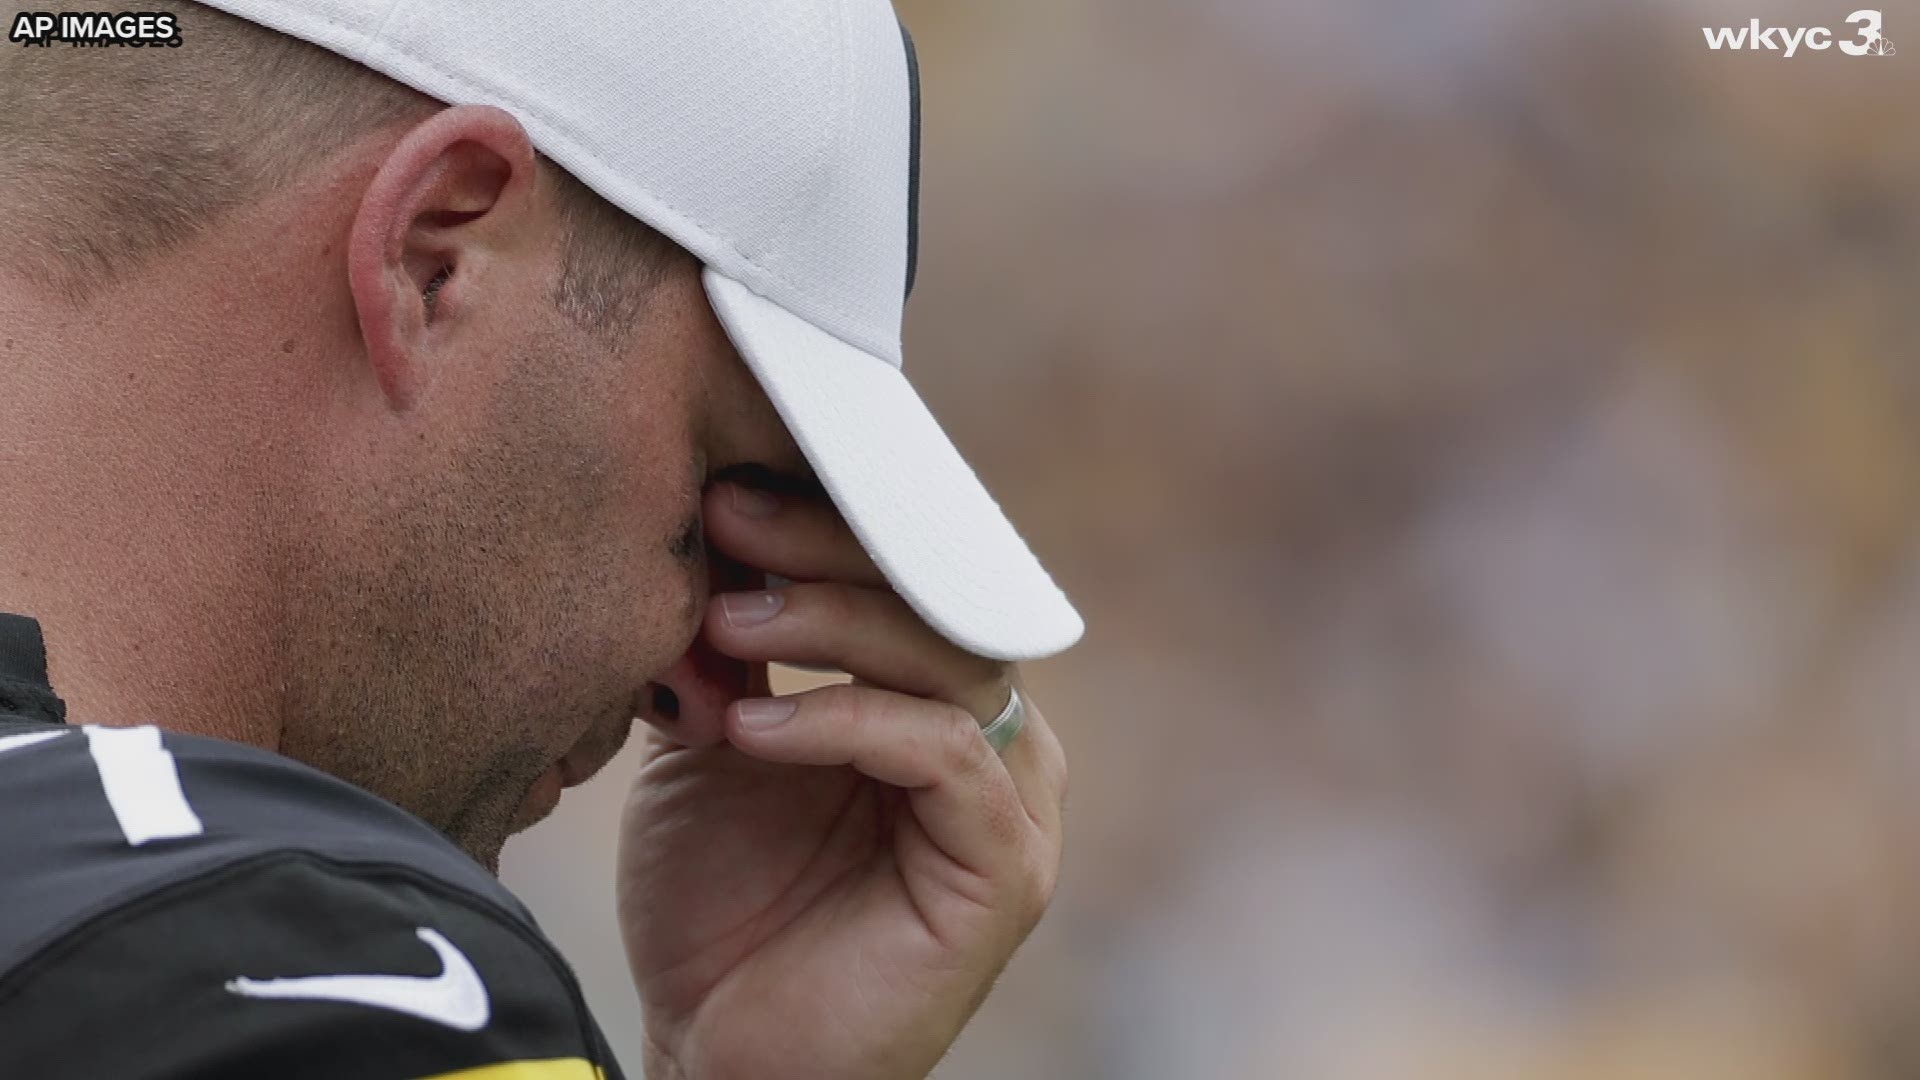 Big Ben is done!  The QB will underdog surgery on his elbow this week.